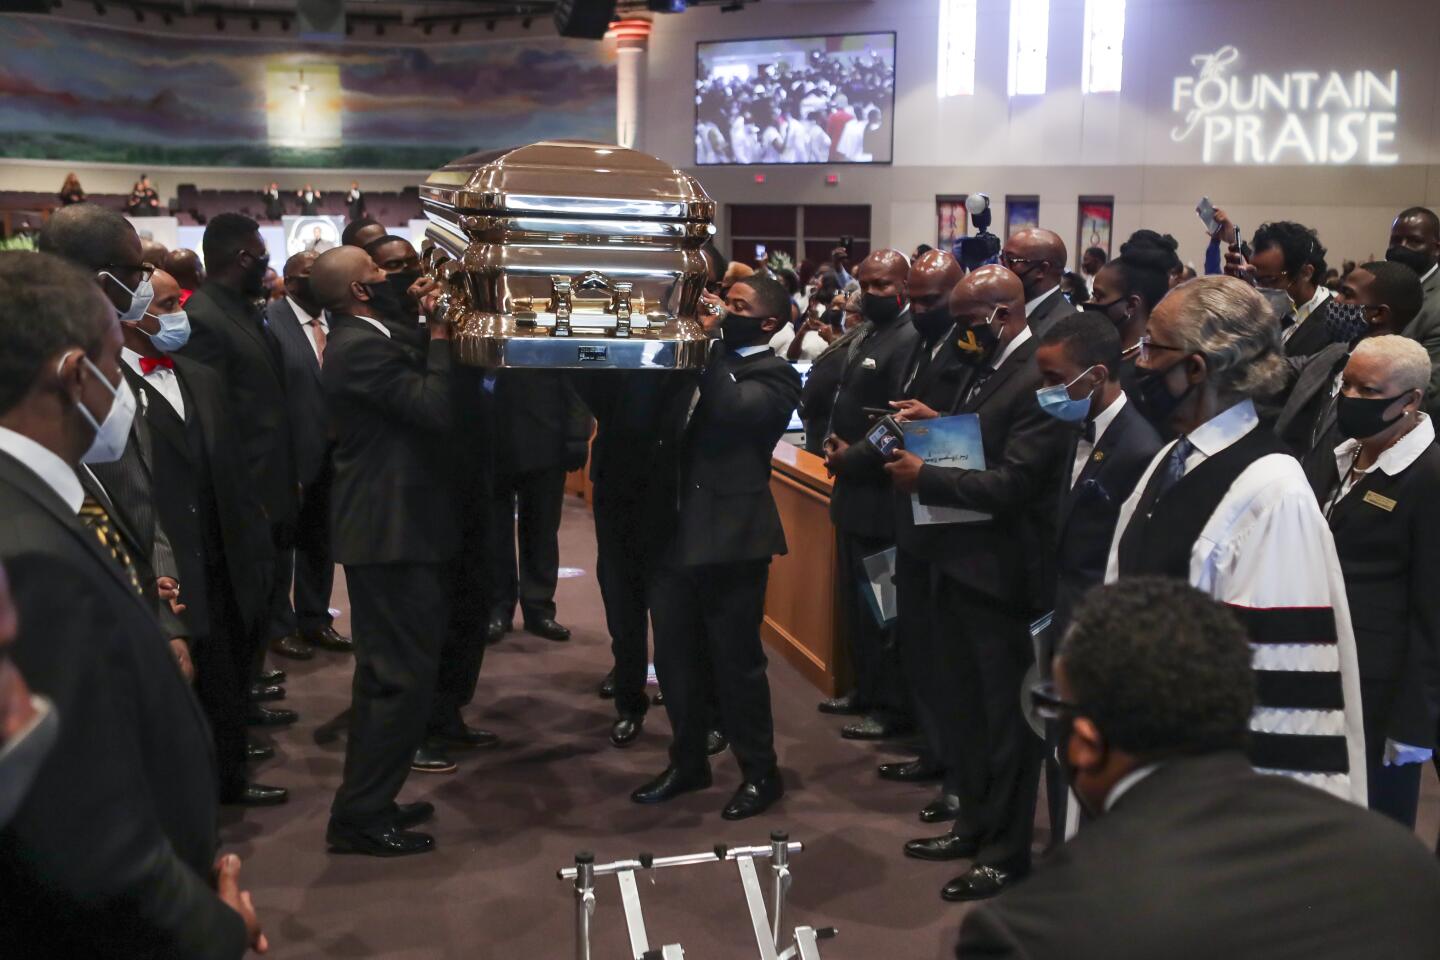 Pallbearers carry the casket following the funeral of George Floyd June 9, 2020, at The Fountain of Praise church in Houston. - George Floyd will be laid to rest Tuesday in his Houston hometown, the culmination of a long farewell to the 46-year-old African American whose death in custody ignited global protests against police brutality and racism. Thousands of well-wishers filed past Floyd's coffin in a public viewing a day earlier, as a court set bail at $1 million for the white officer charged with his murder last month in Minneapolis. (Photo by Godofredo A. VASQUEZ / POOL / AFP) (Photo by GODOFREDO A. VASQUEZ/POOL/AFP via Getty Images)